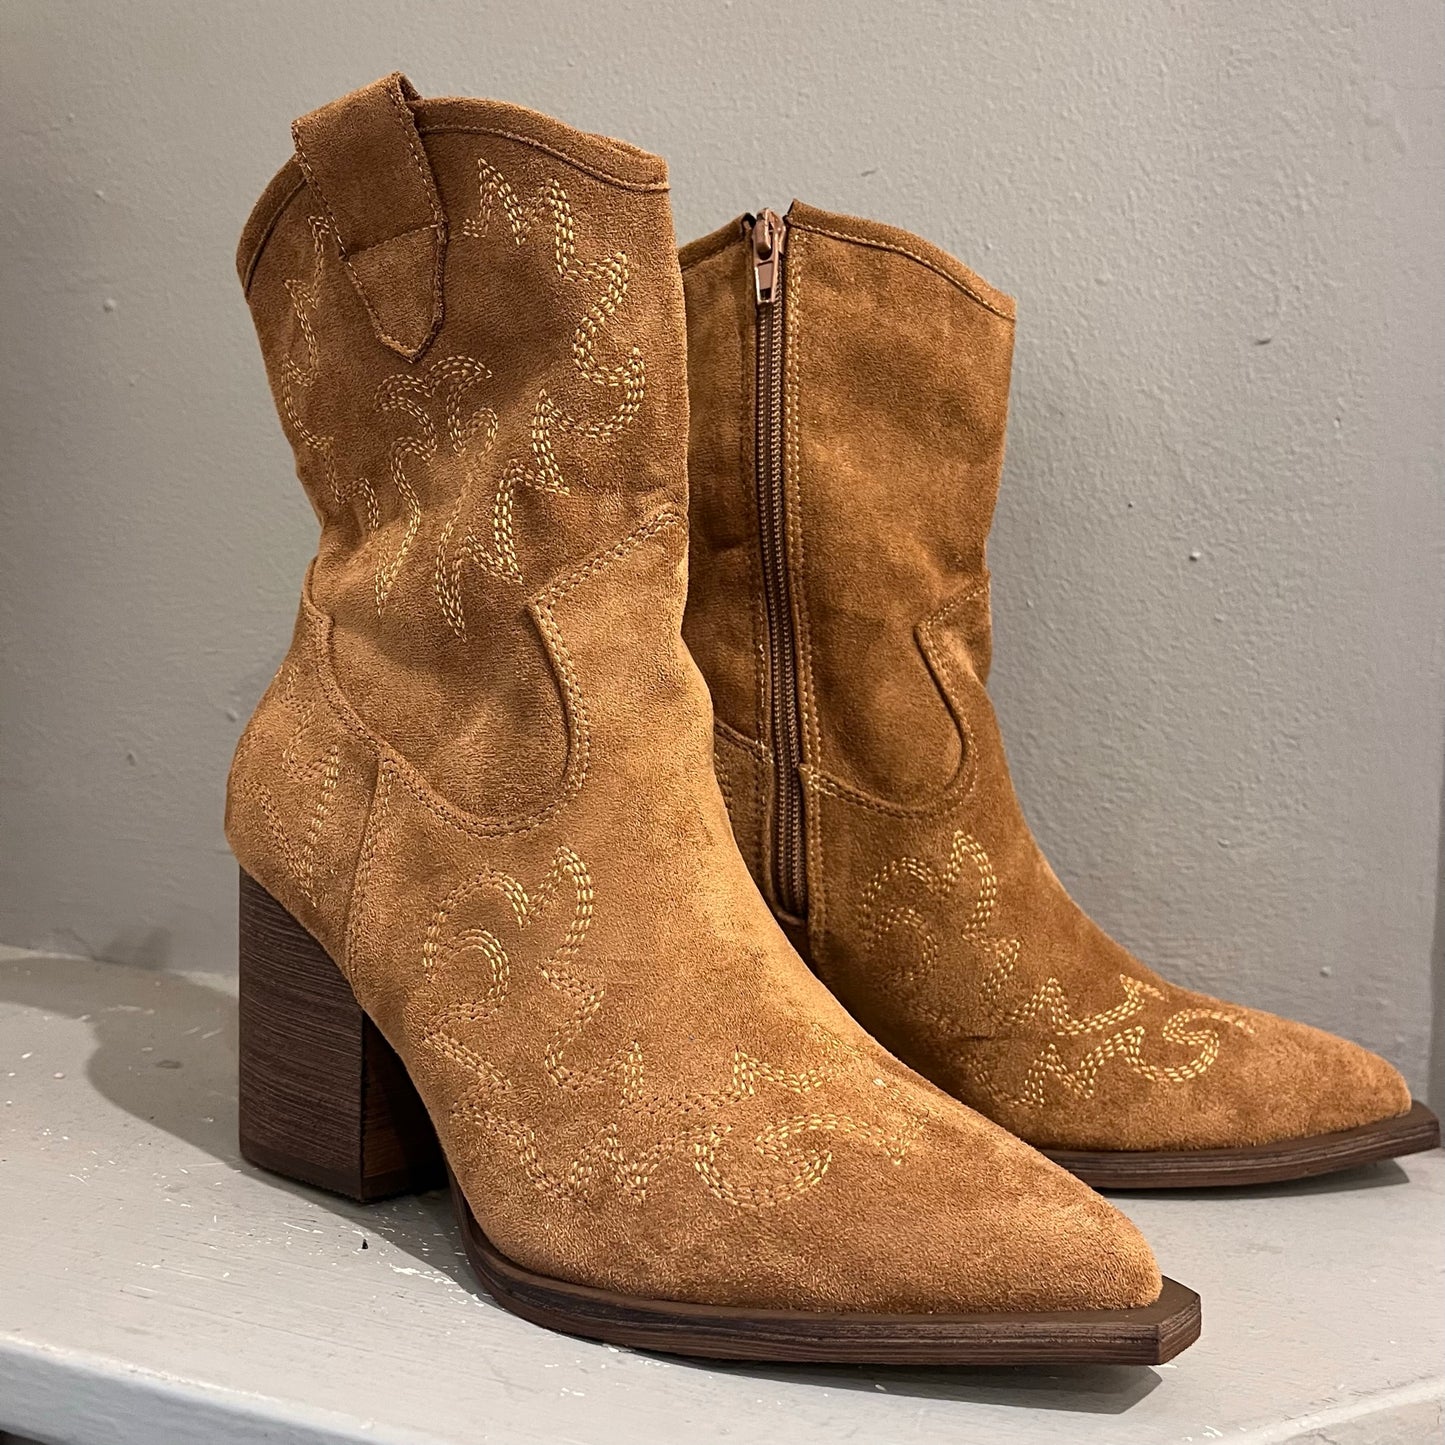 Western style boots - camel